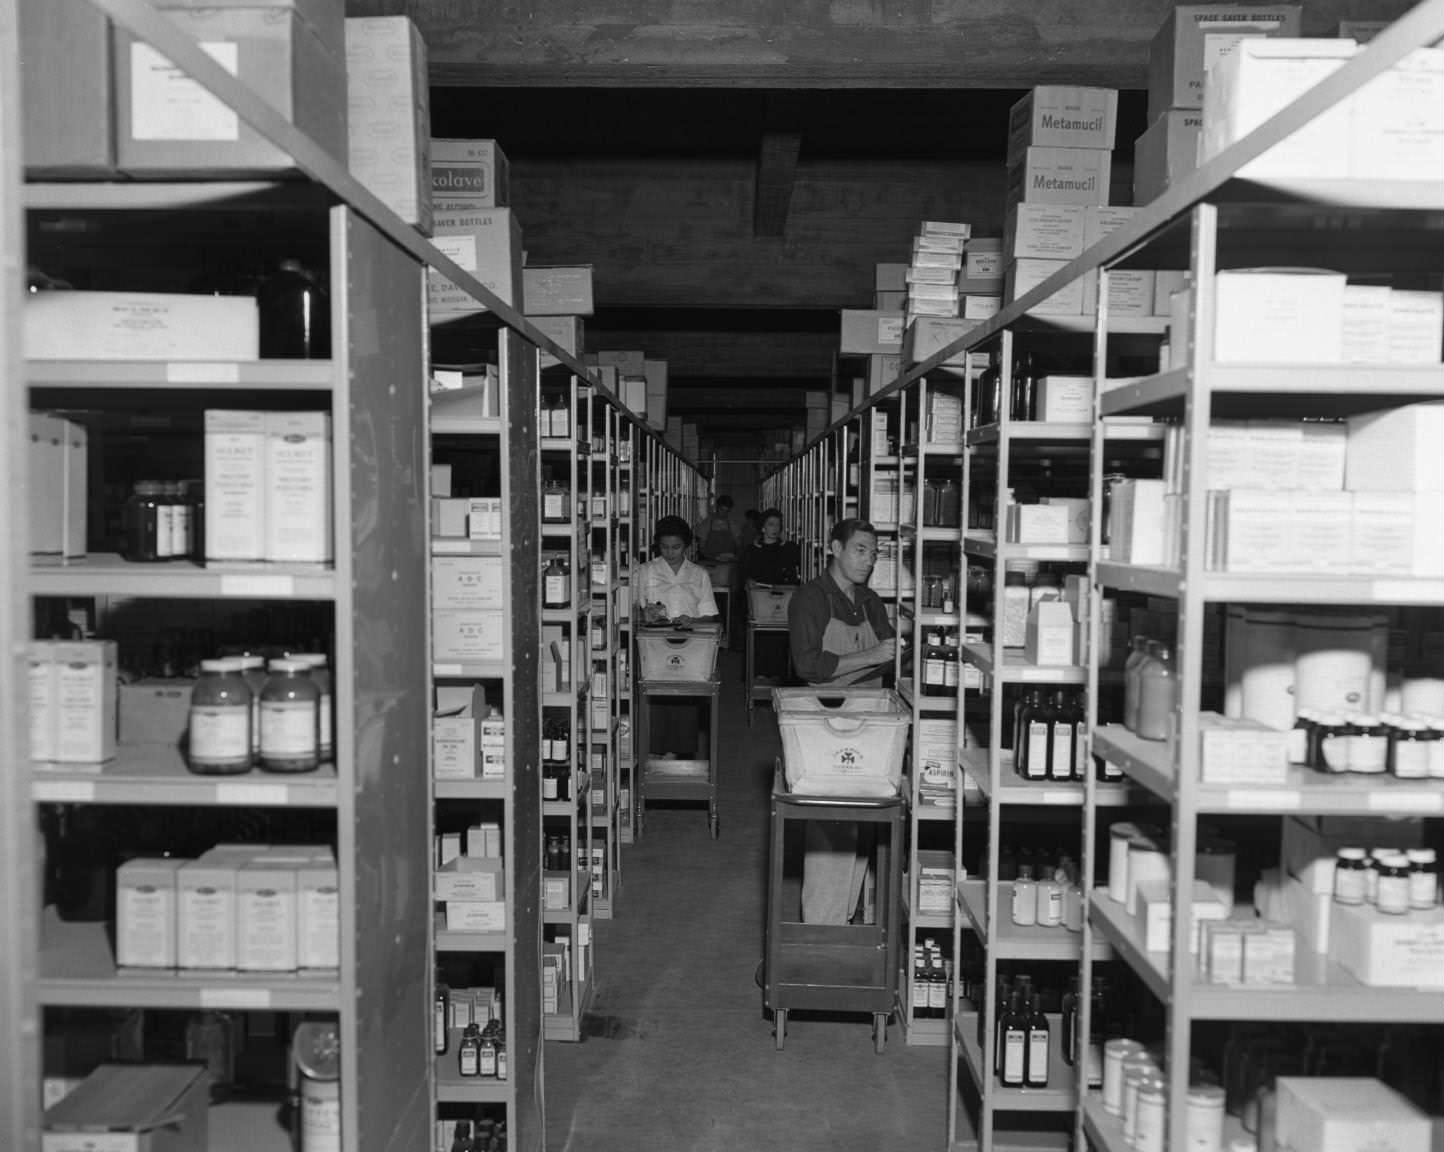 Employees loading shelves of medicine at Behrens Drug Co., 5th and Colorado, 1957